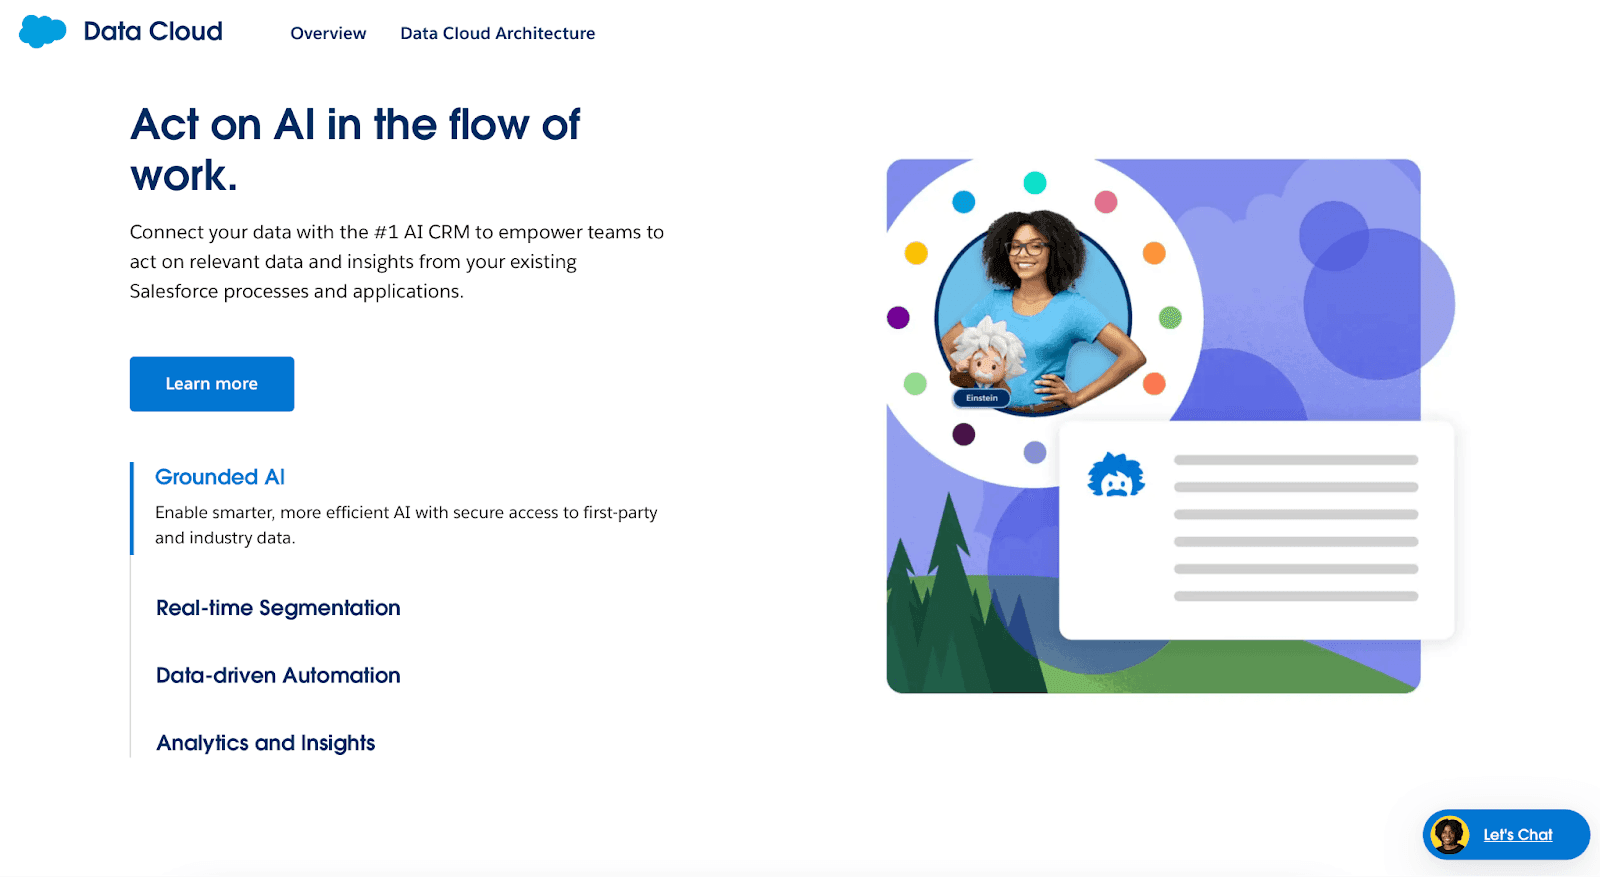 Data Cloud website - Act on AI in the flow of work